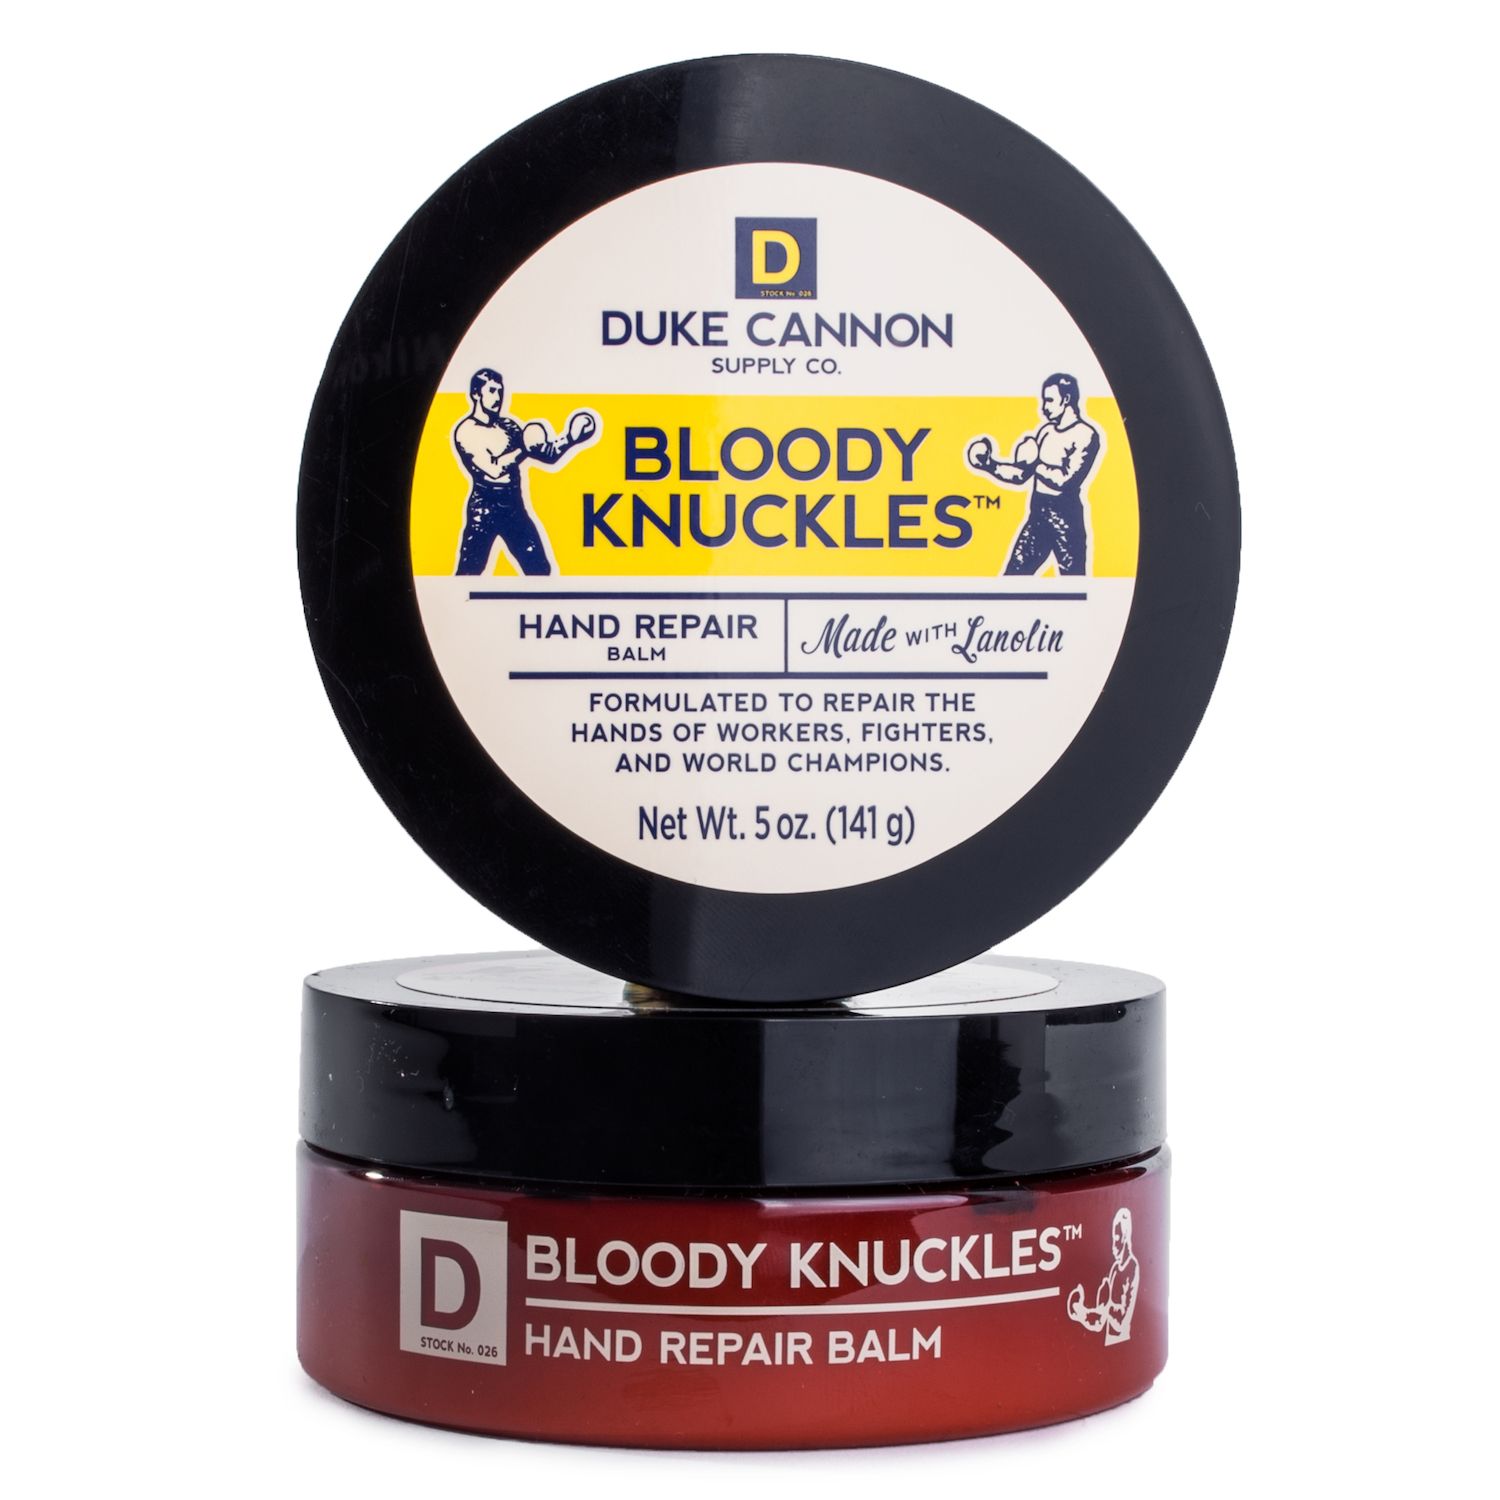 Image for Duke Cannon Supply Co. Bloody Knuckles Hand Repair Balm at Kohl's.